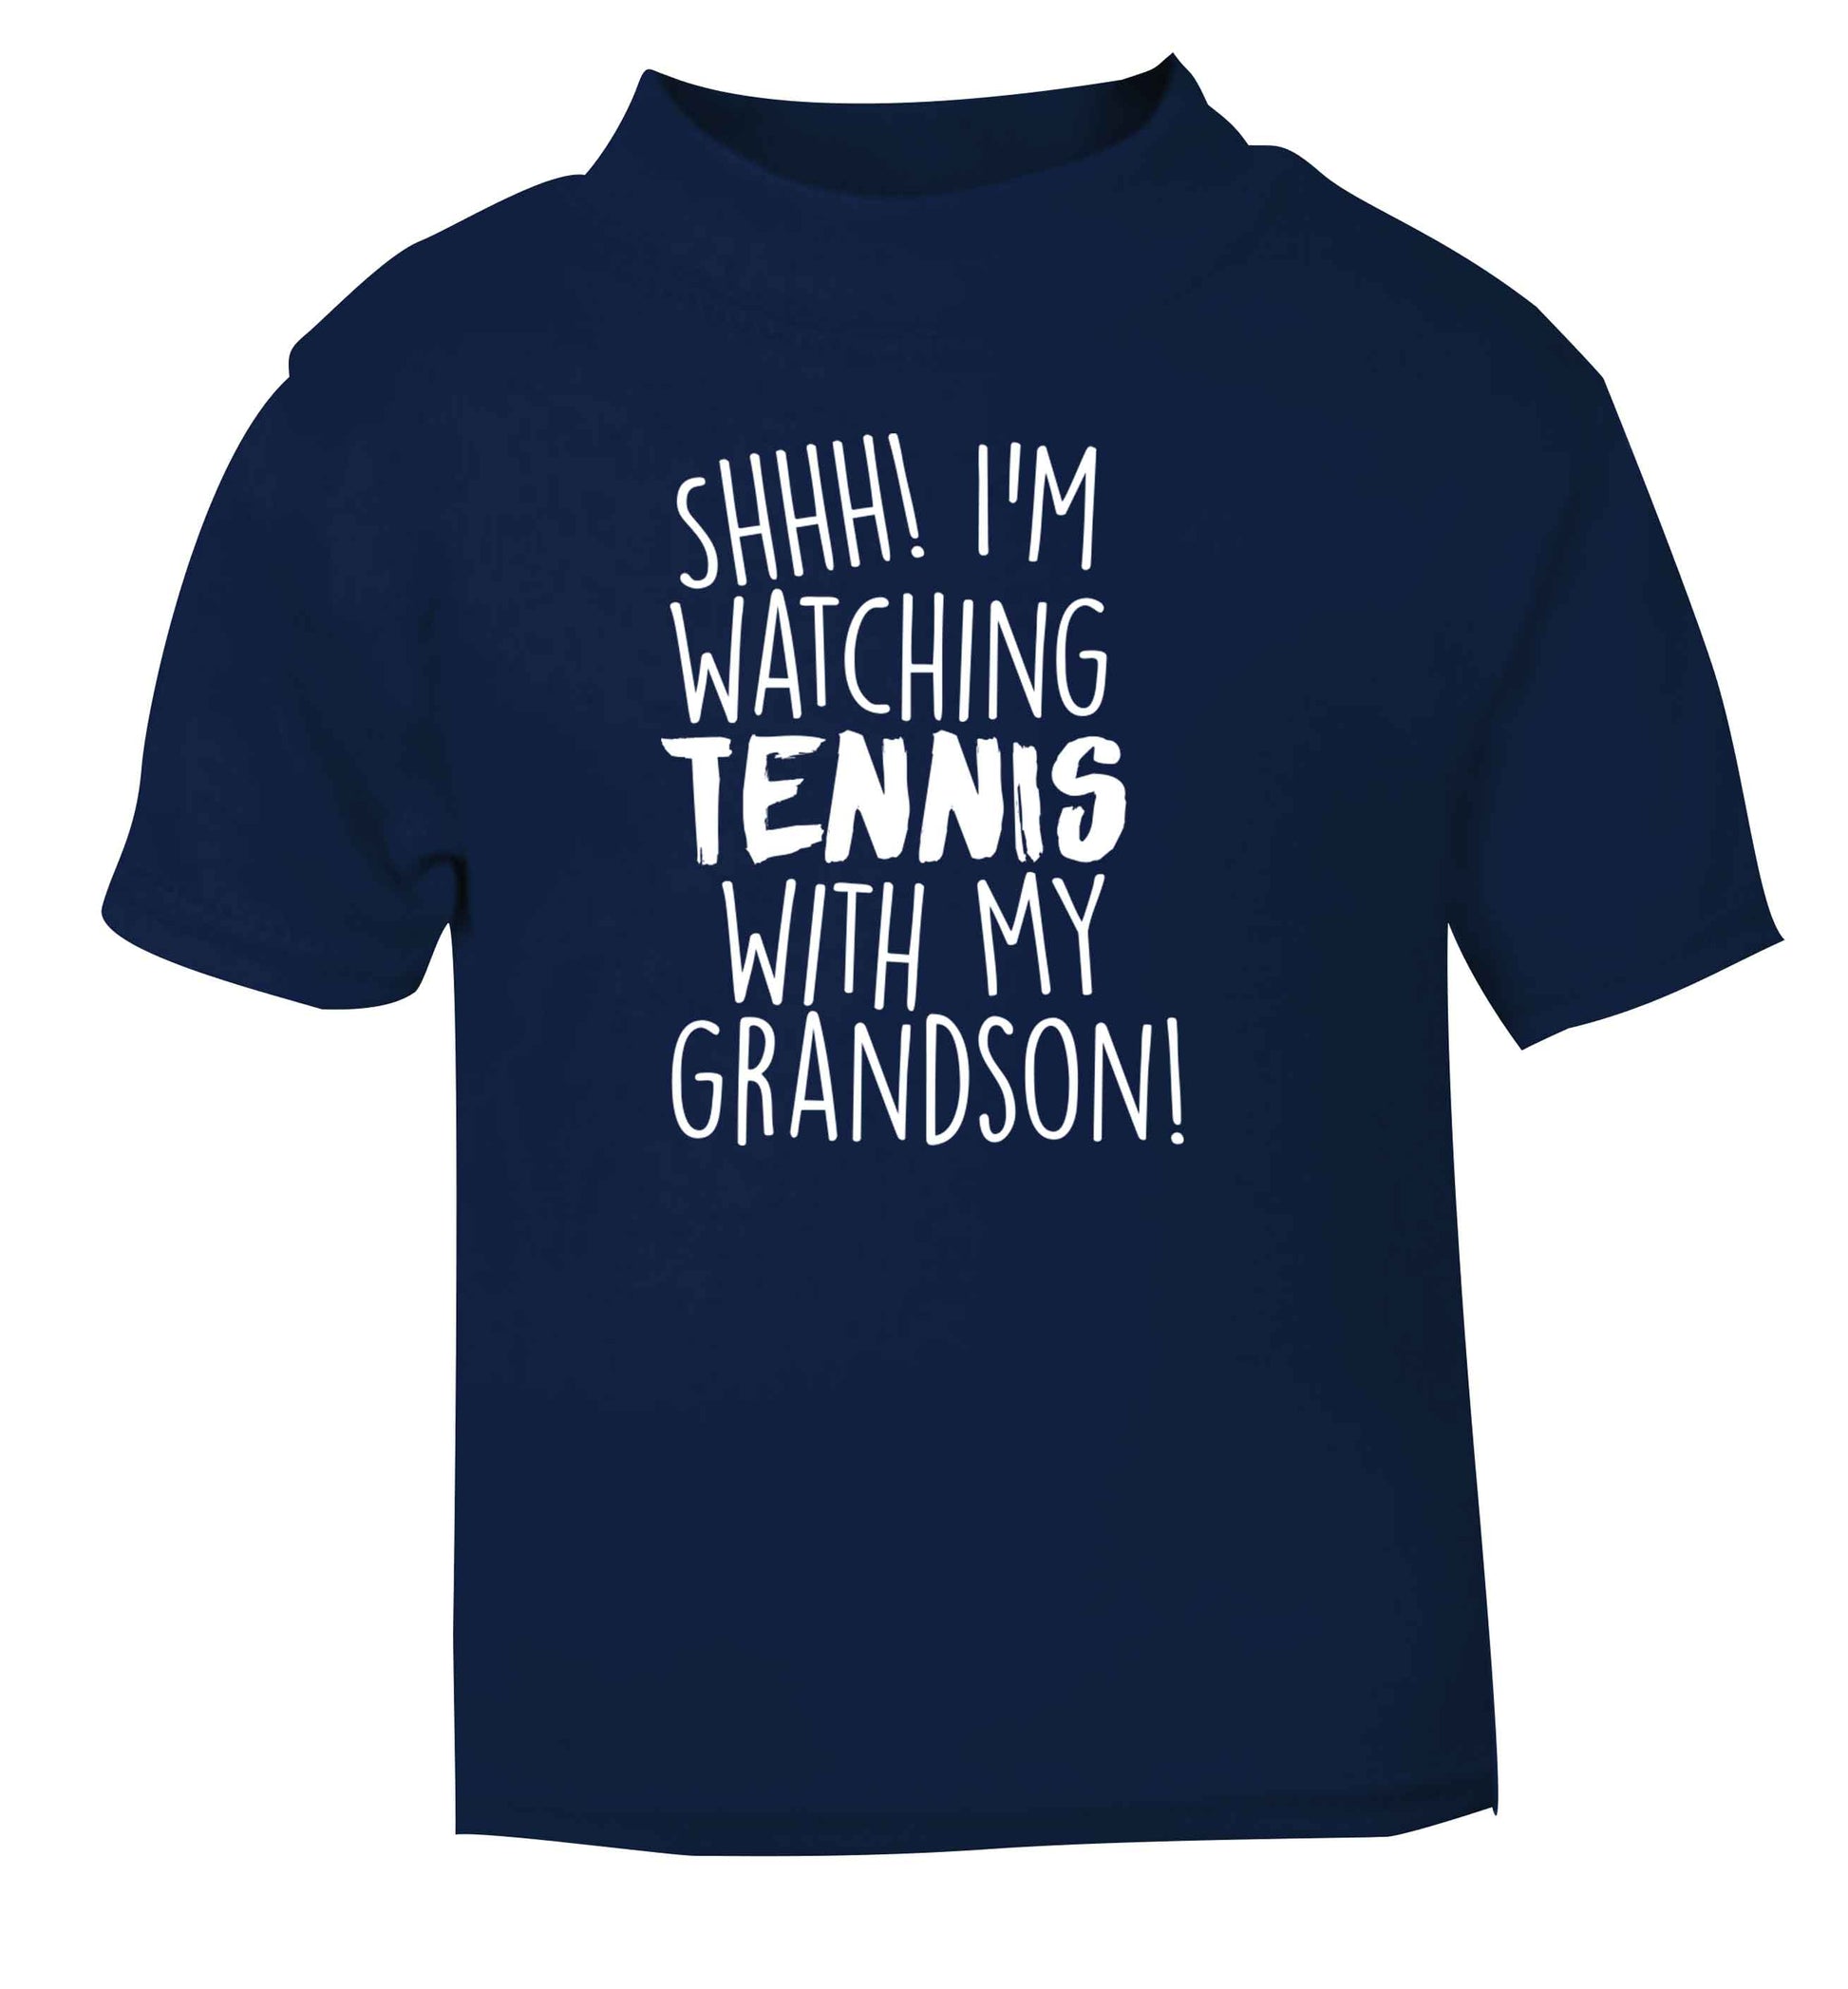 Shh! I'm watching tennis with my grandson! navy Baby Toddler Tshirt 2 Years